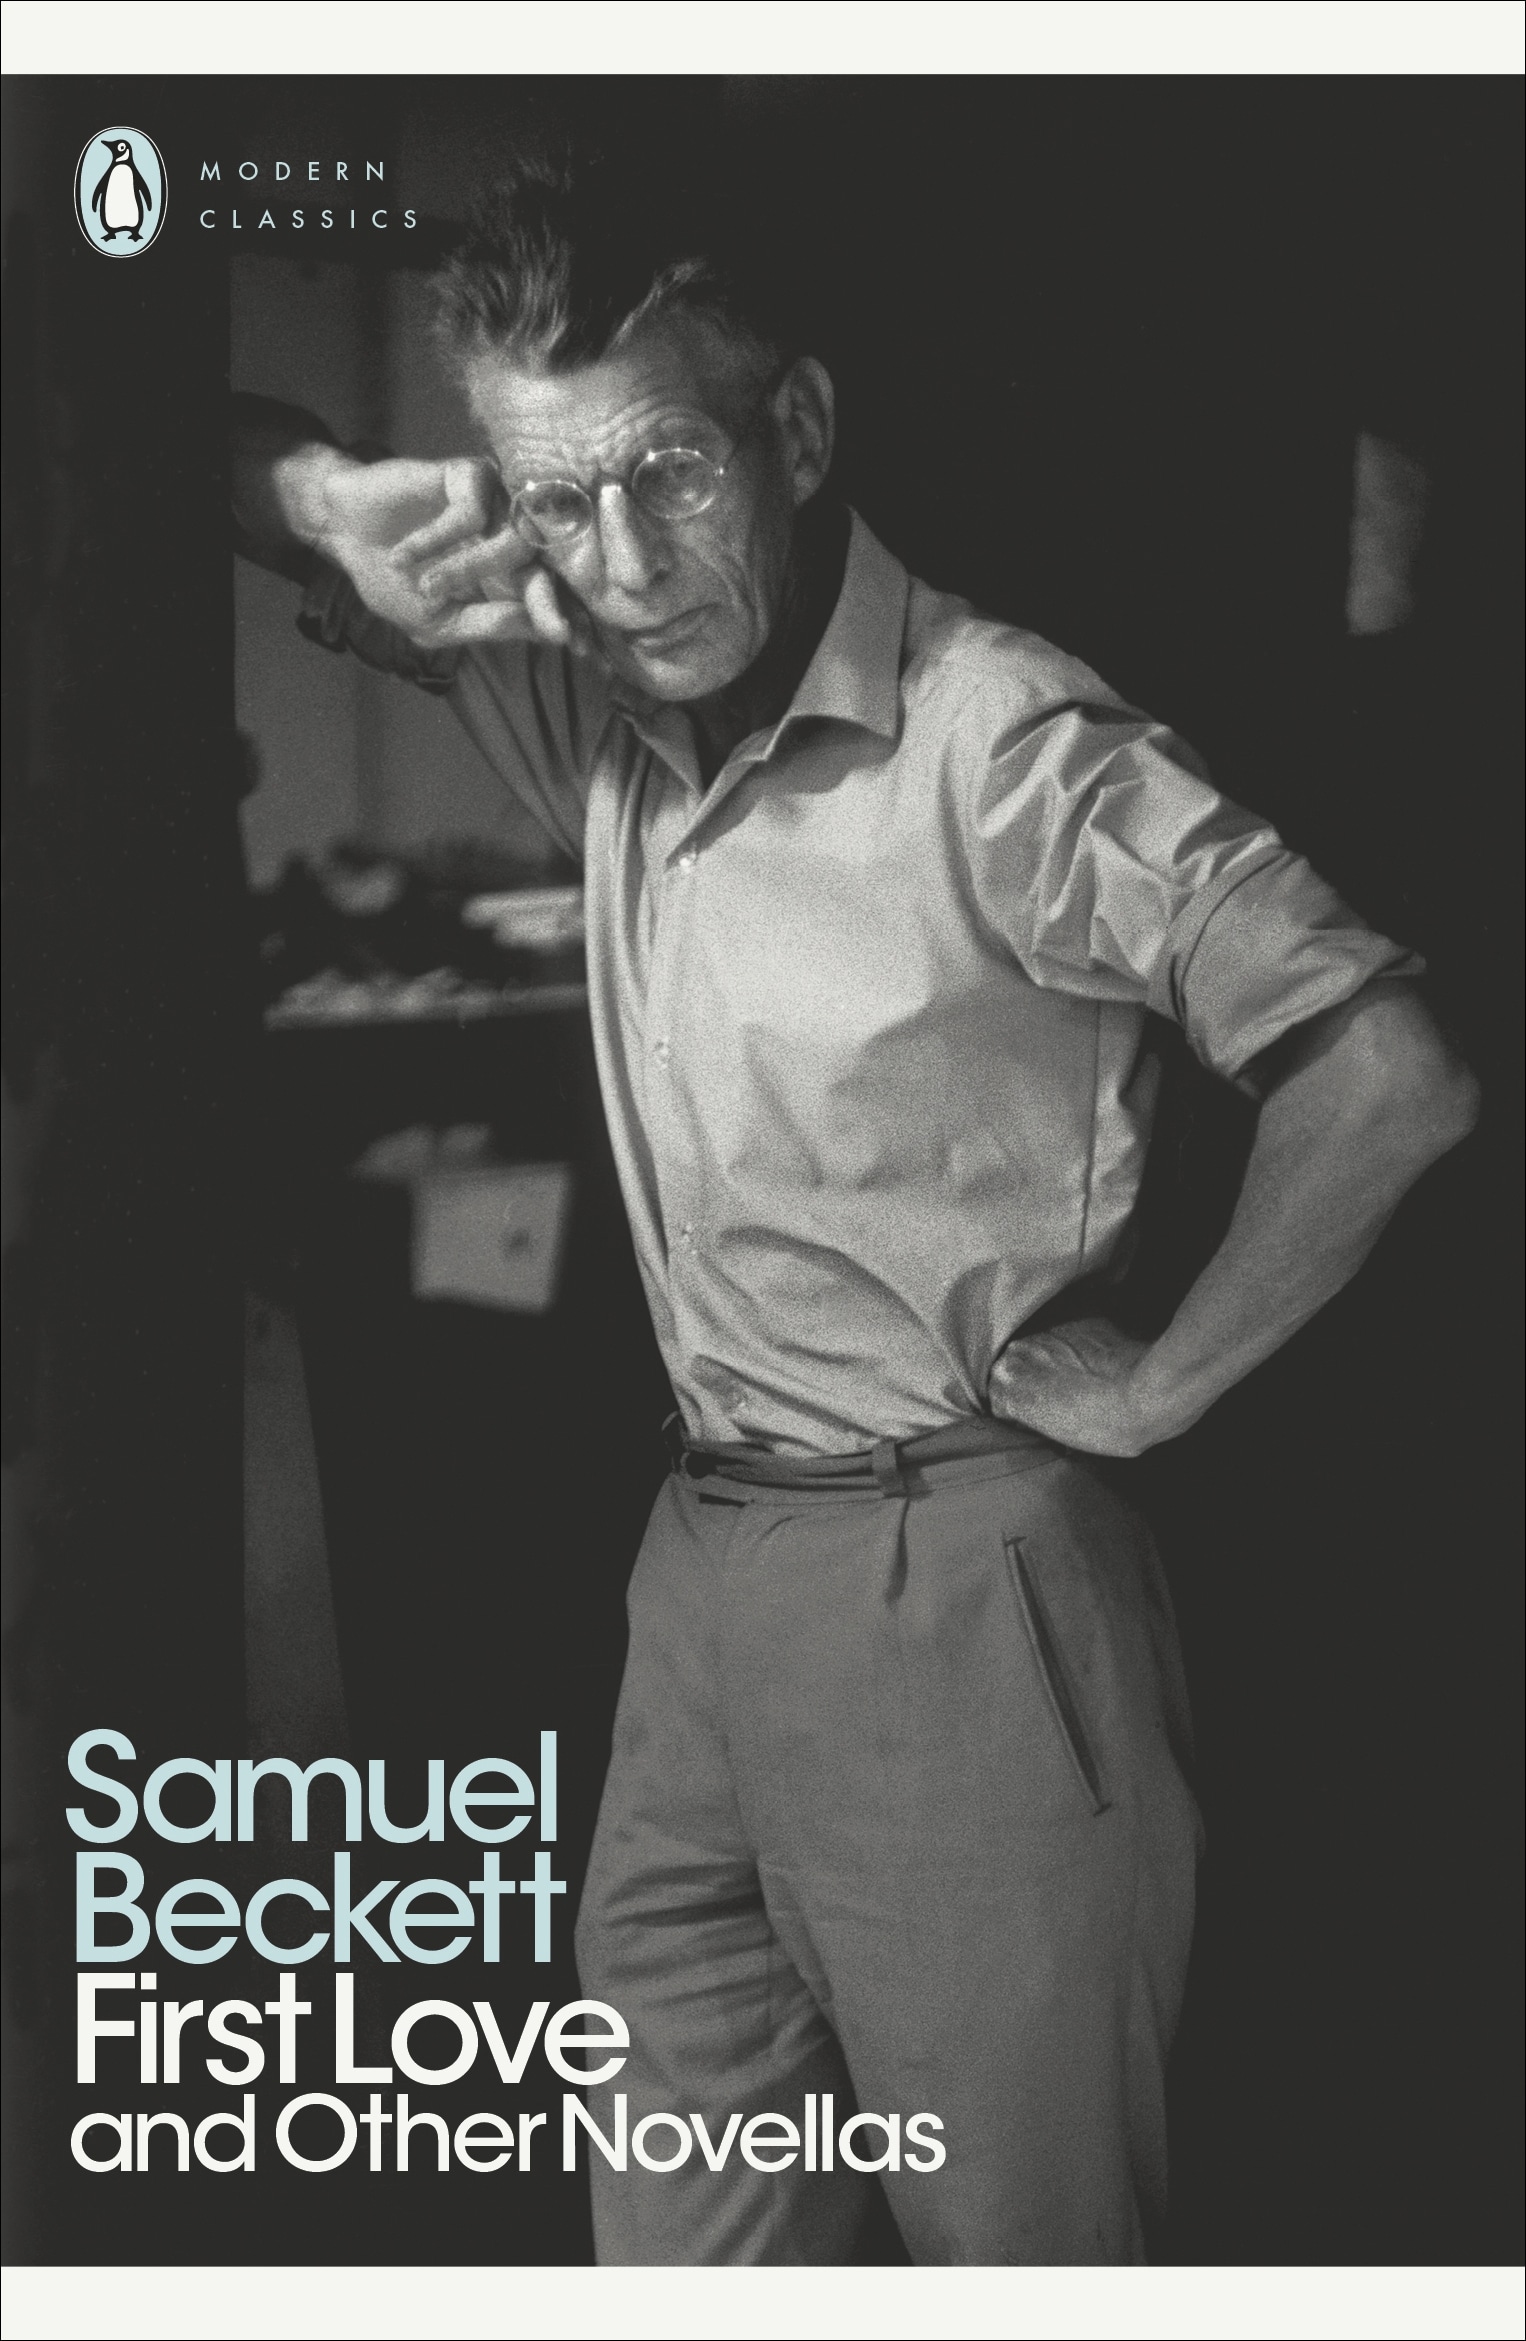 Book “First Love and Other Novellas” by Samuel Beckett, Gerry Dukes — February 24, 2000